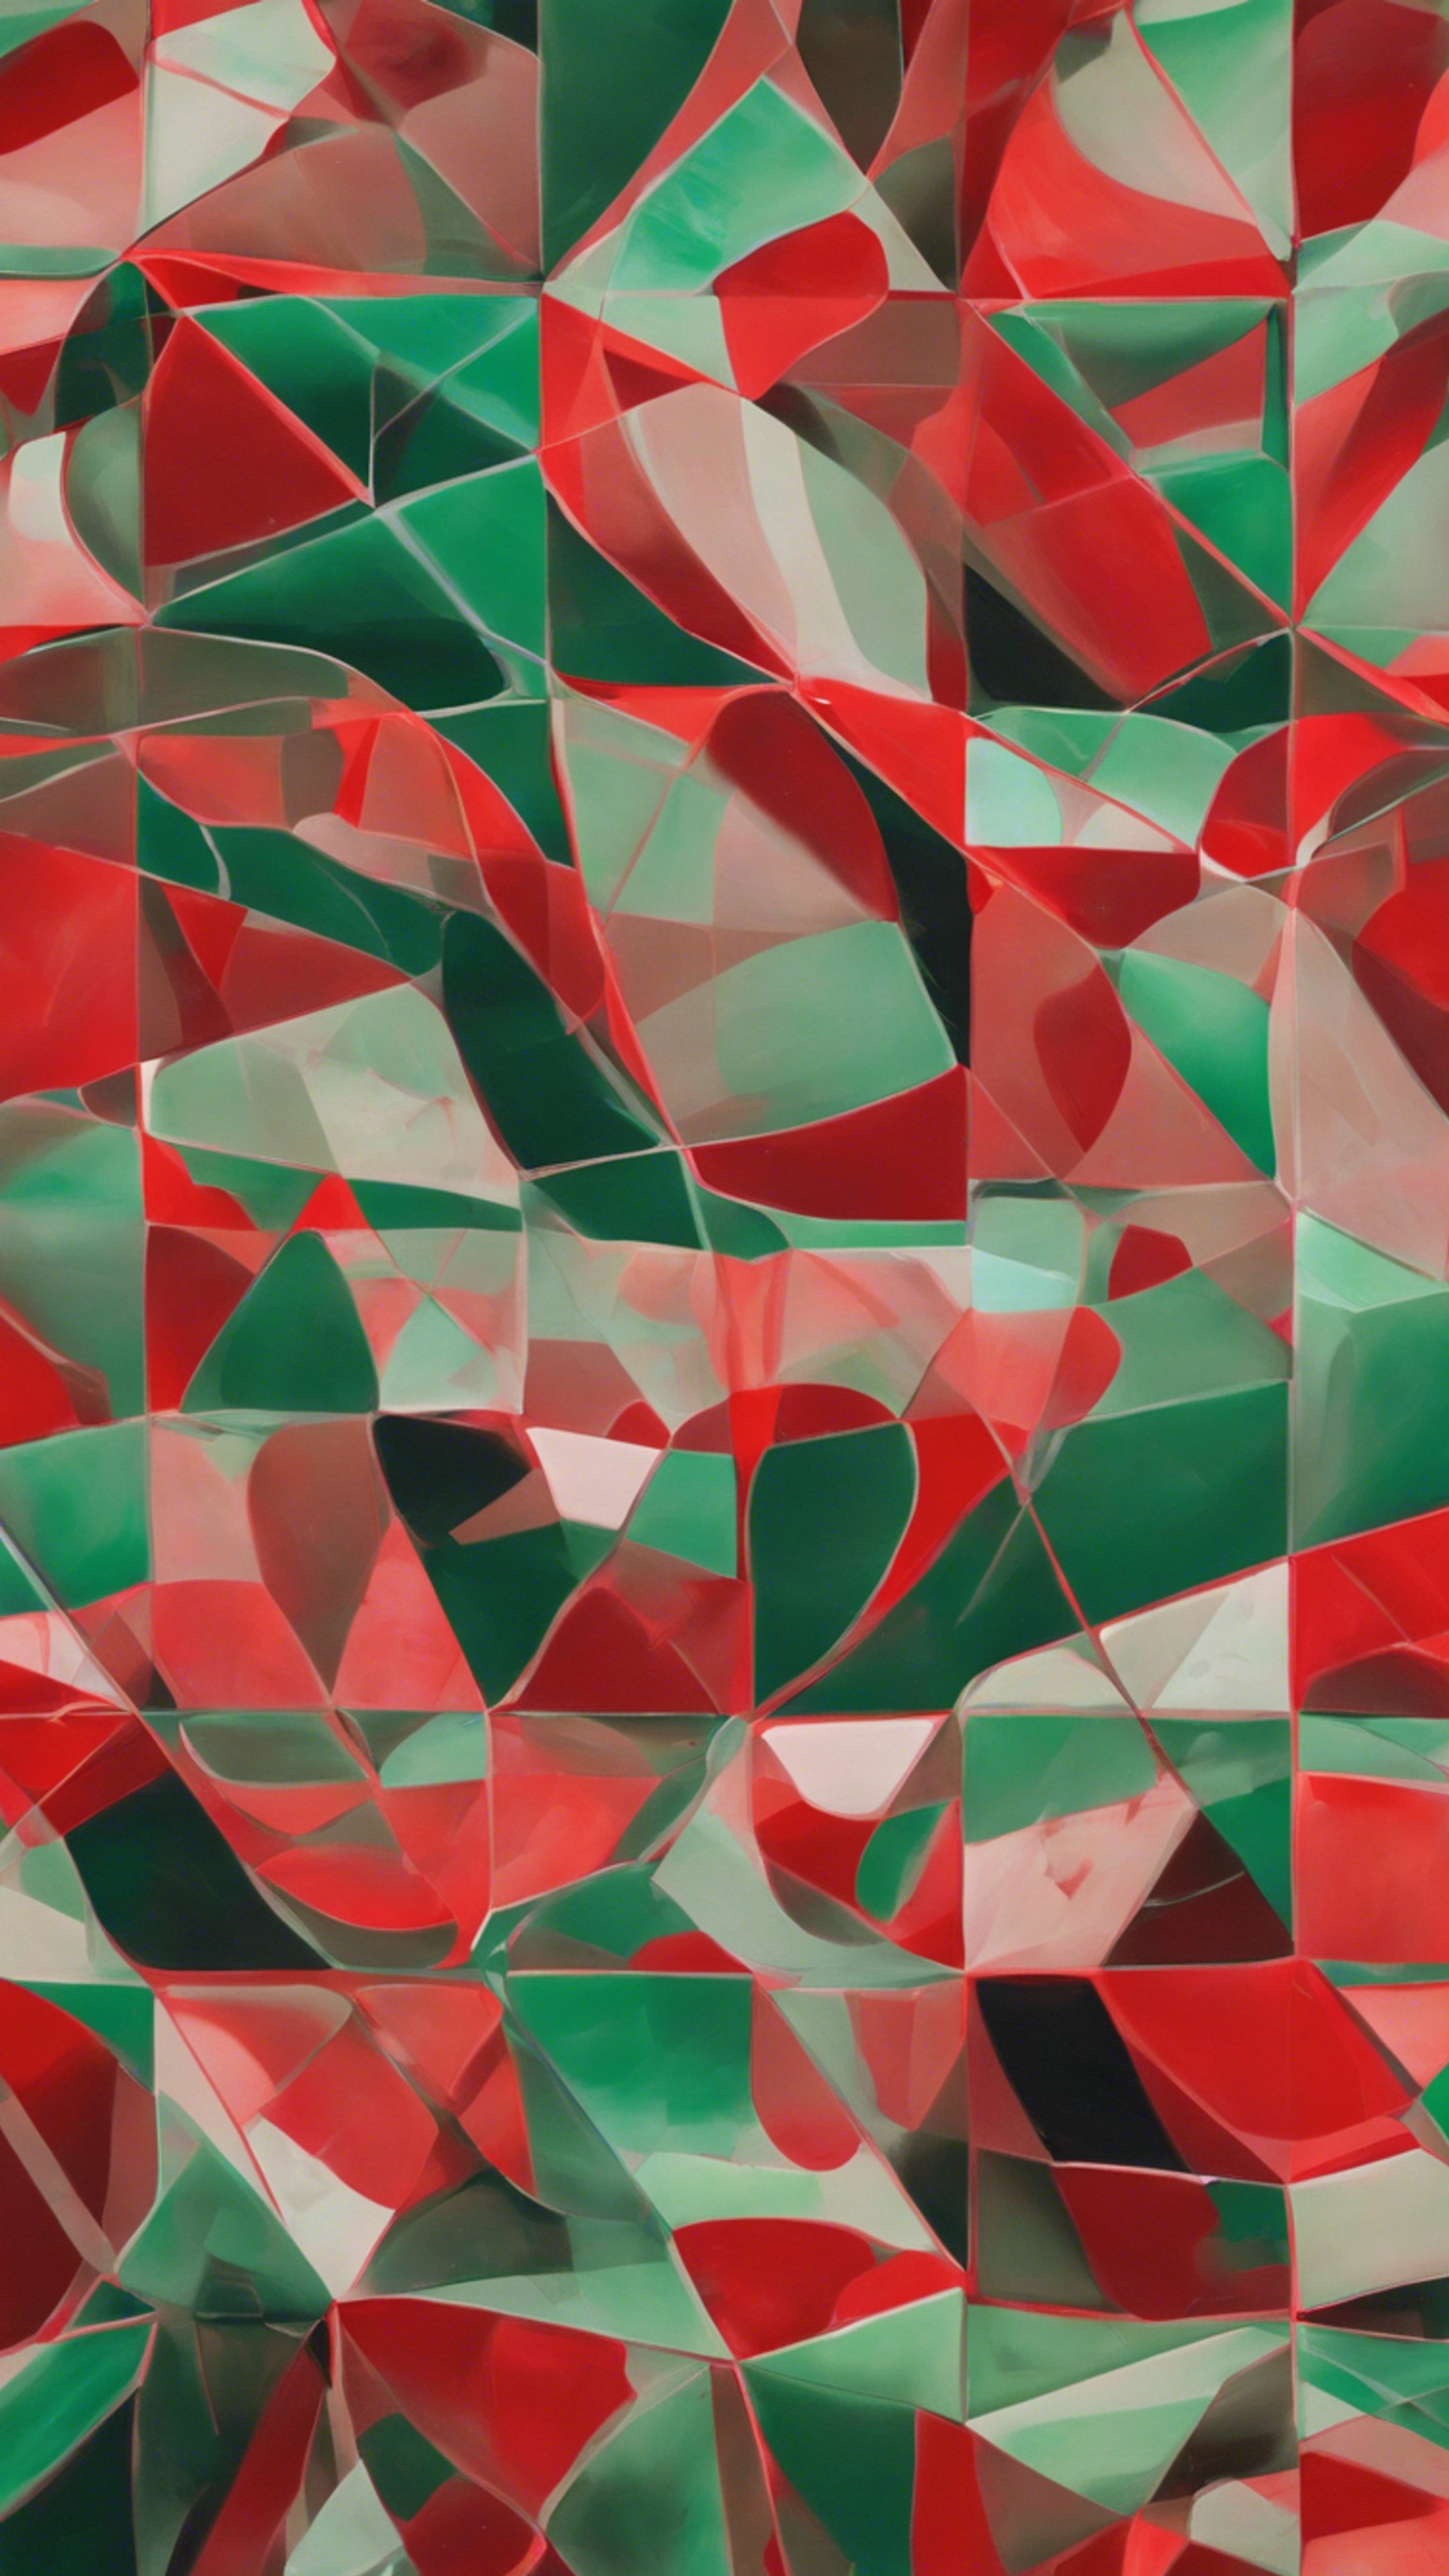 A modernist painting of red and green geometrical shapes, seamless in their connection duvar kağıdı[cfa3acf637214e6a9239]